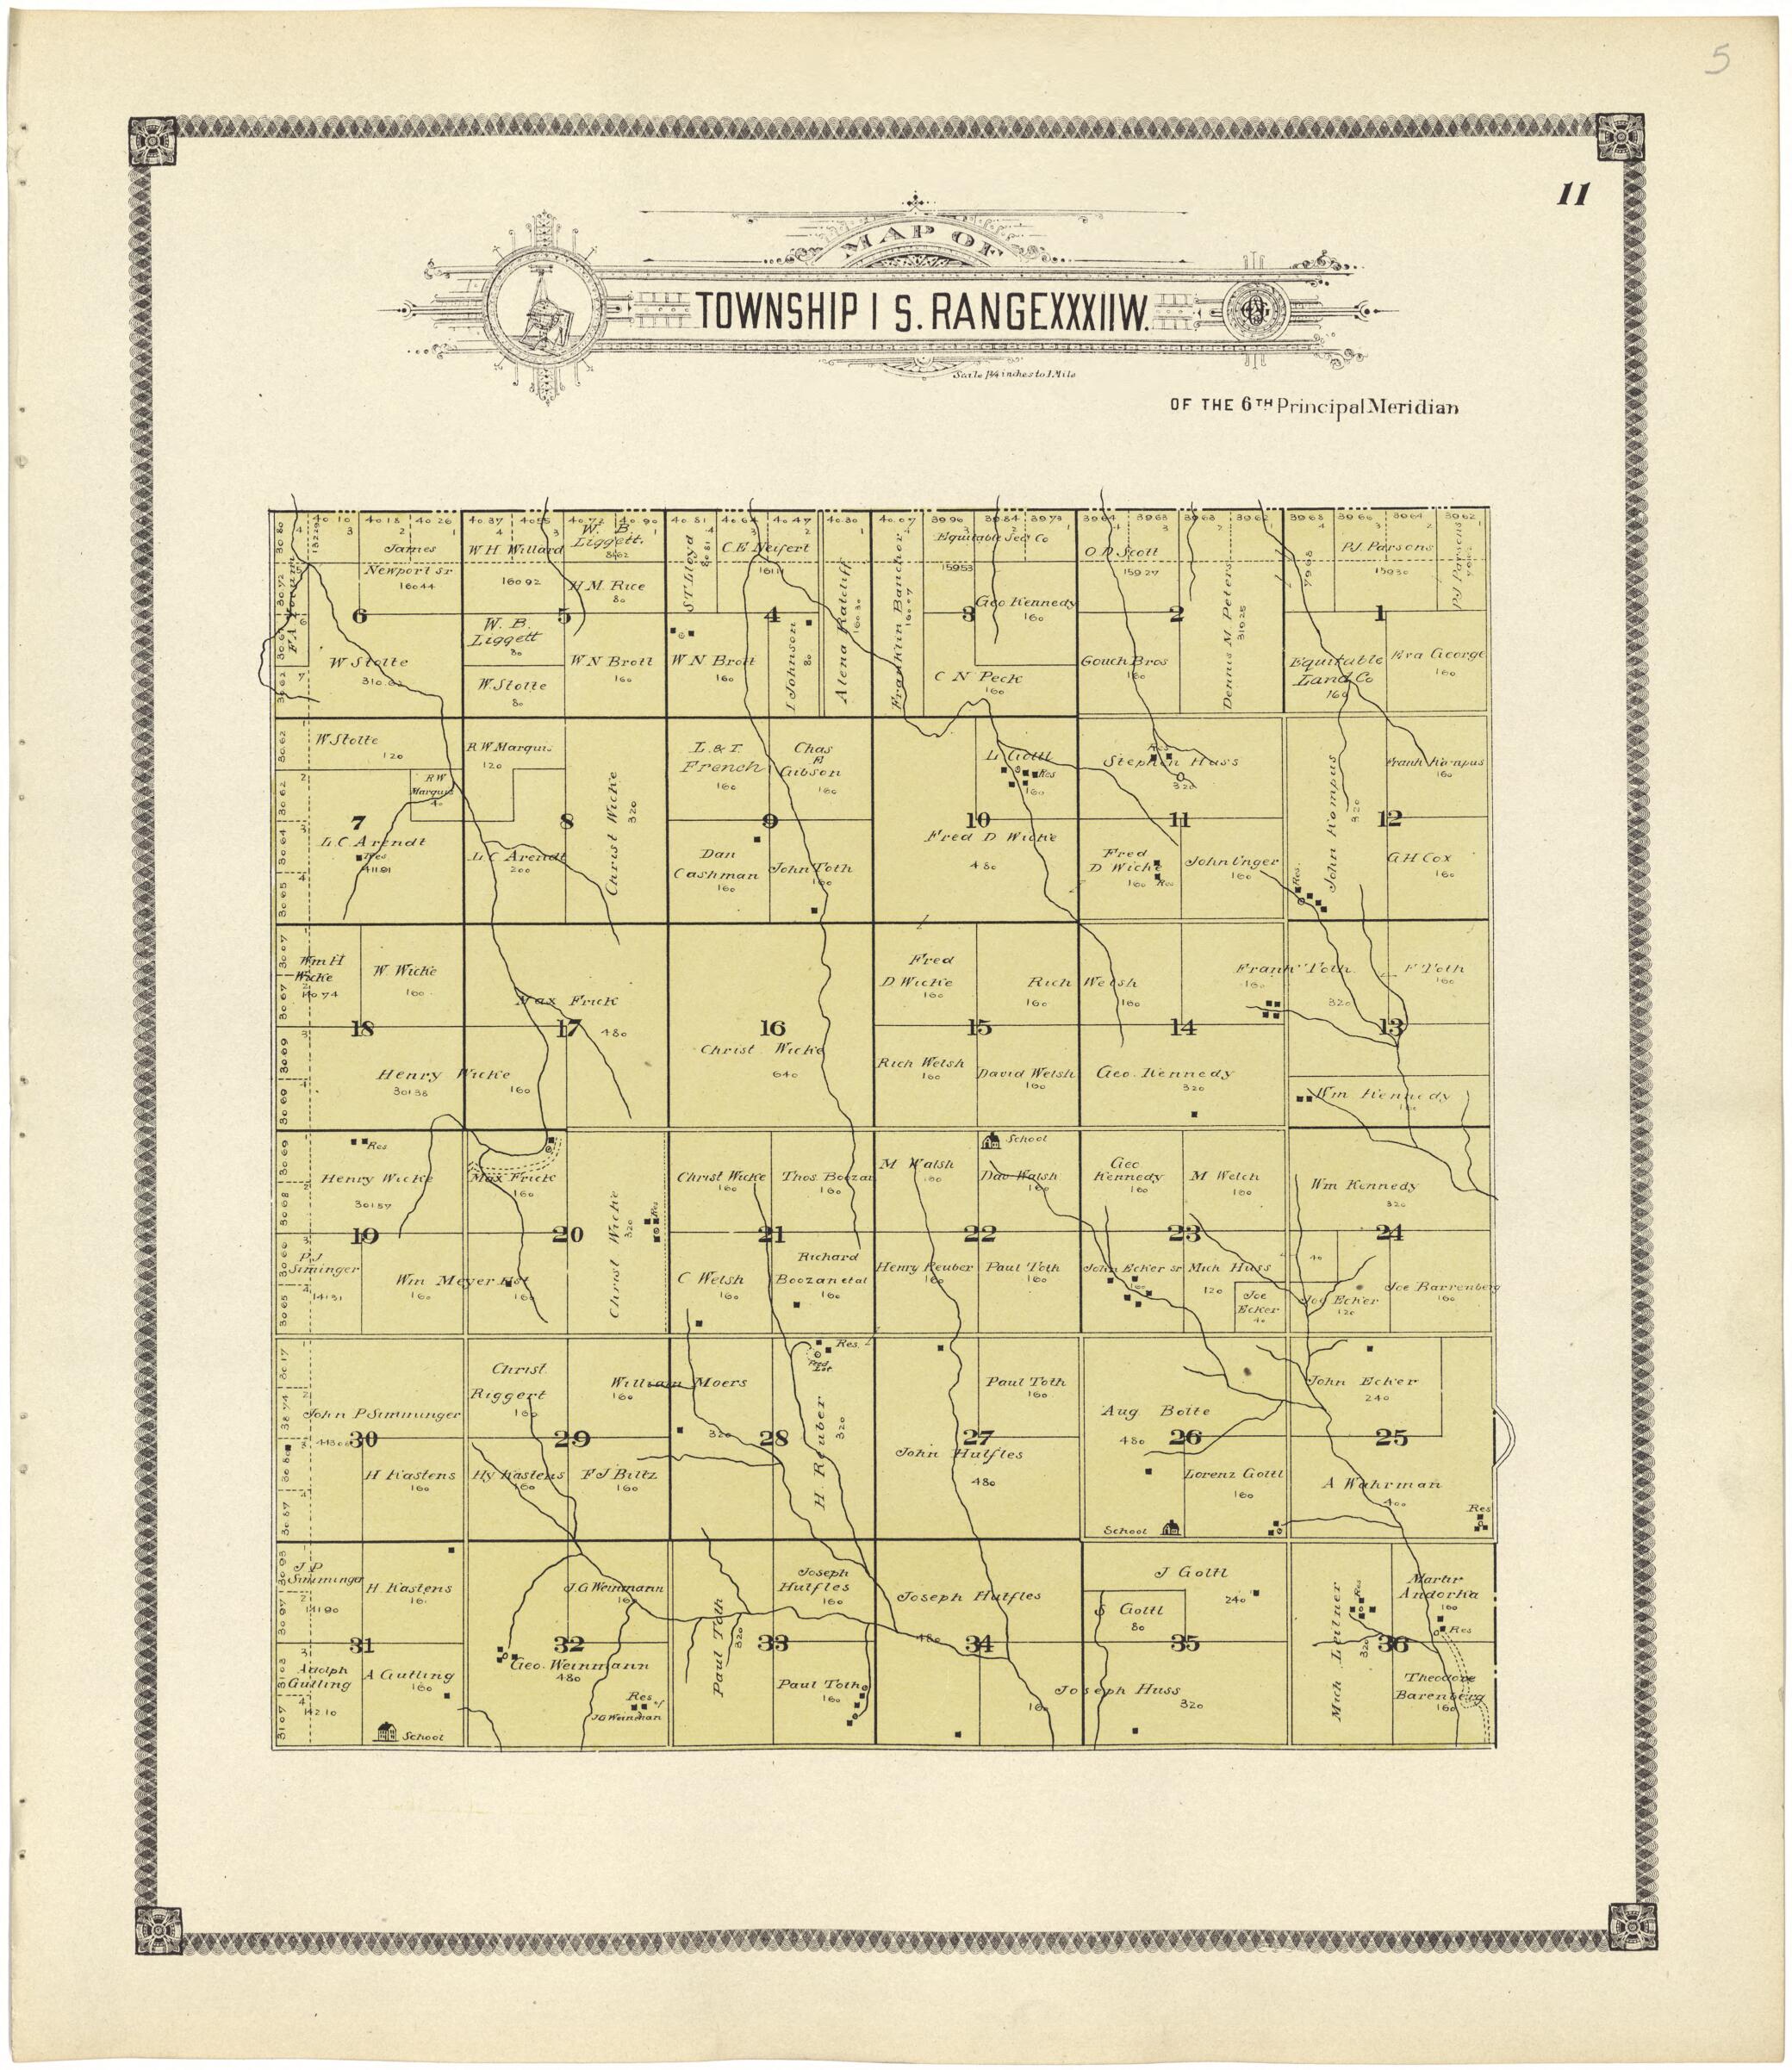 This old map of Map of Township 1 S. Range XXXII W. from Standard Atlas of Rawlins County, Kansas from 1906 was created by  Geo. A. Ogle &amp; Co in 1906